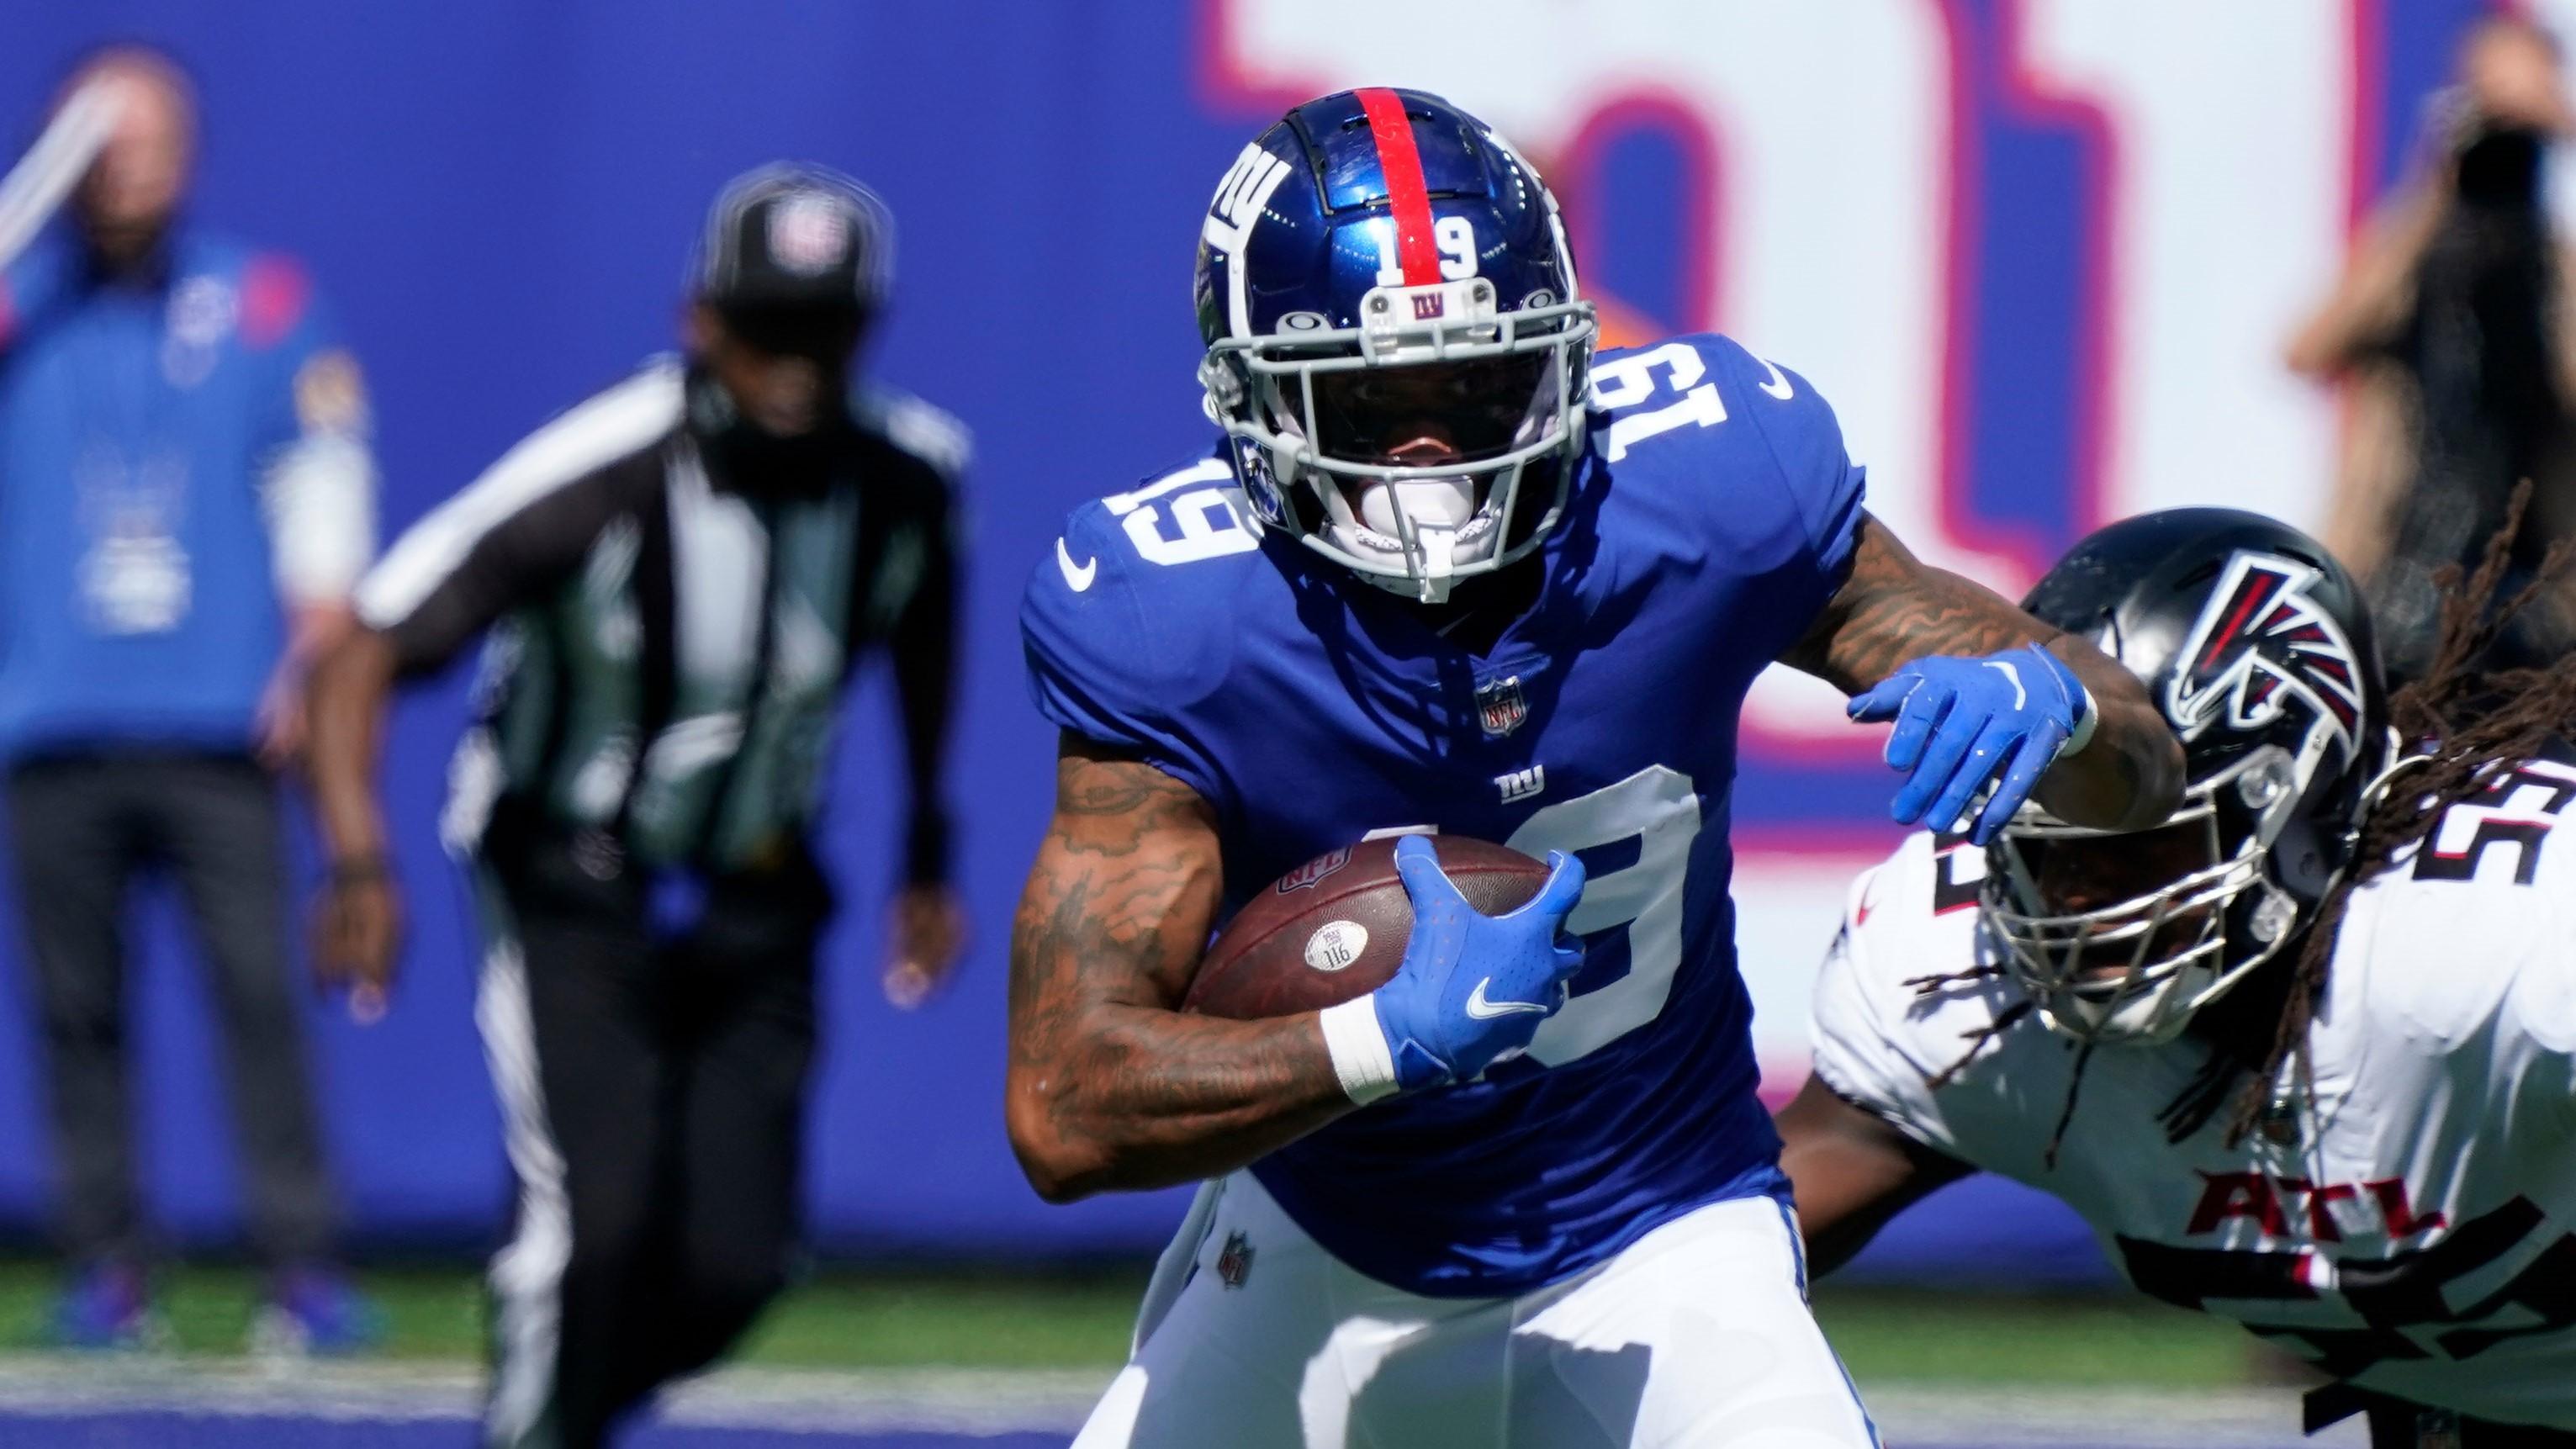 Sep 26, 2021; E. Rutherford, N.J., USA; New York Giants wide receiver Kenny Golladay (19) runs with the ball as Atlanta Falcons linebacker Steven Means (55) defends at MetLife Stadium. Mandatory Credit: Robert Deutsch-USA TODAY Sports / Robert Deutsch-USA TODAY Sports